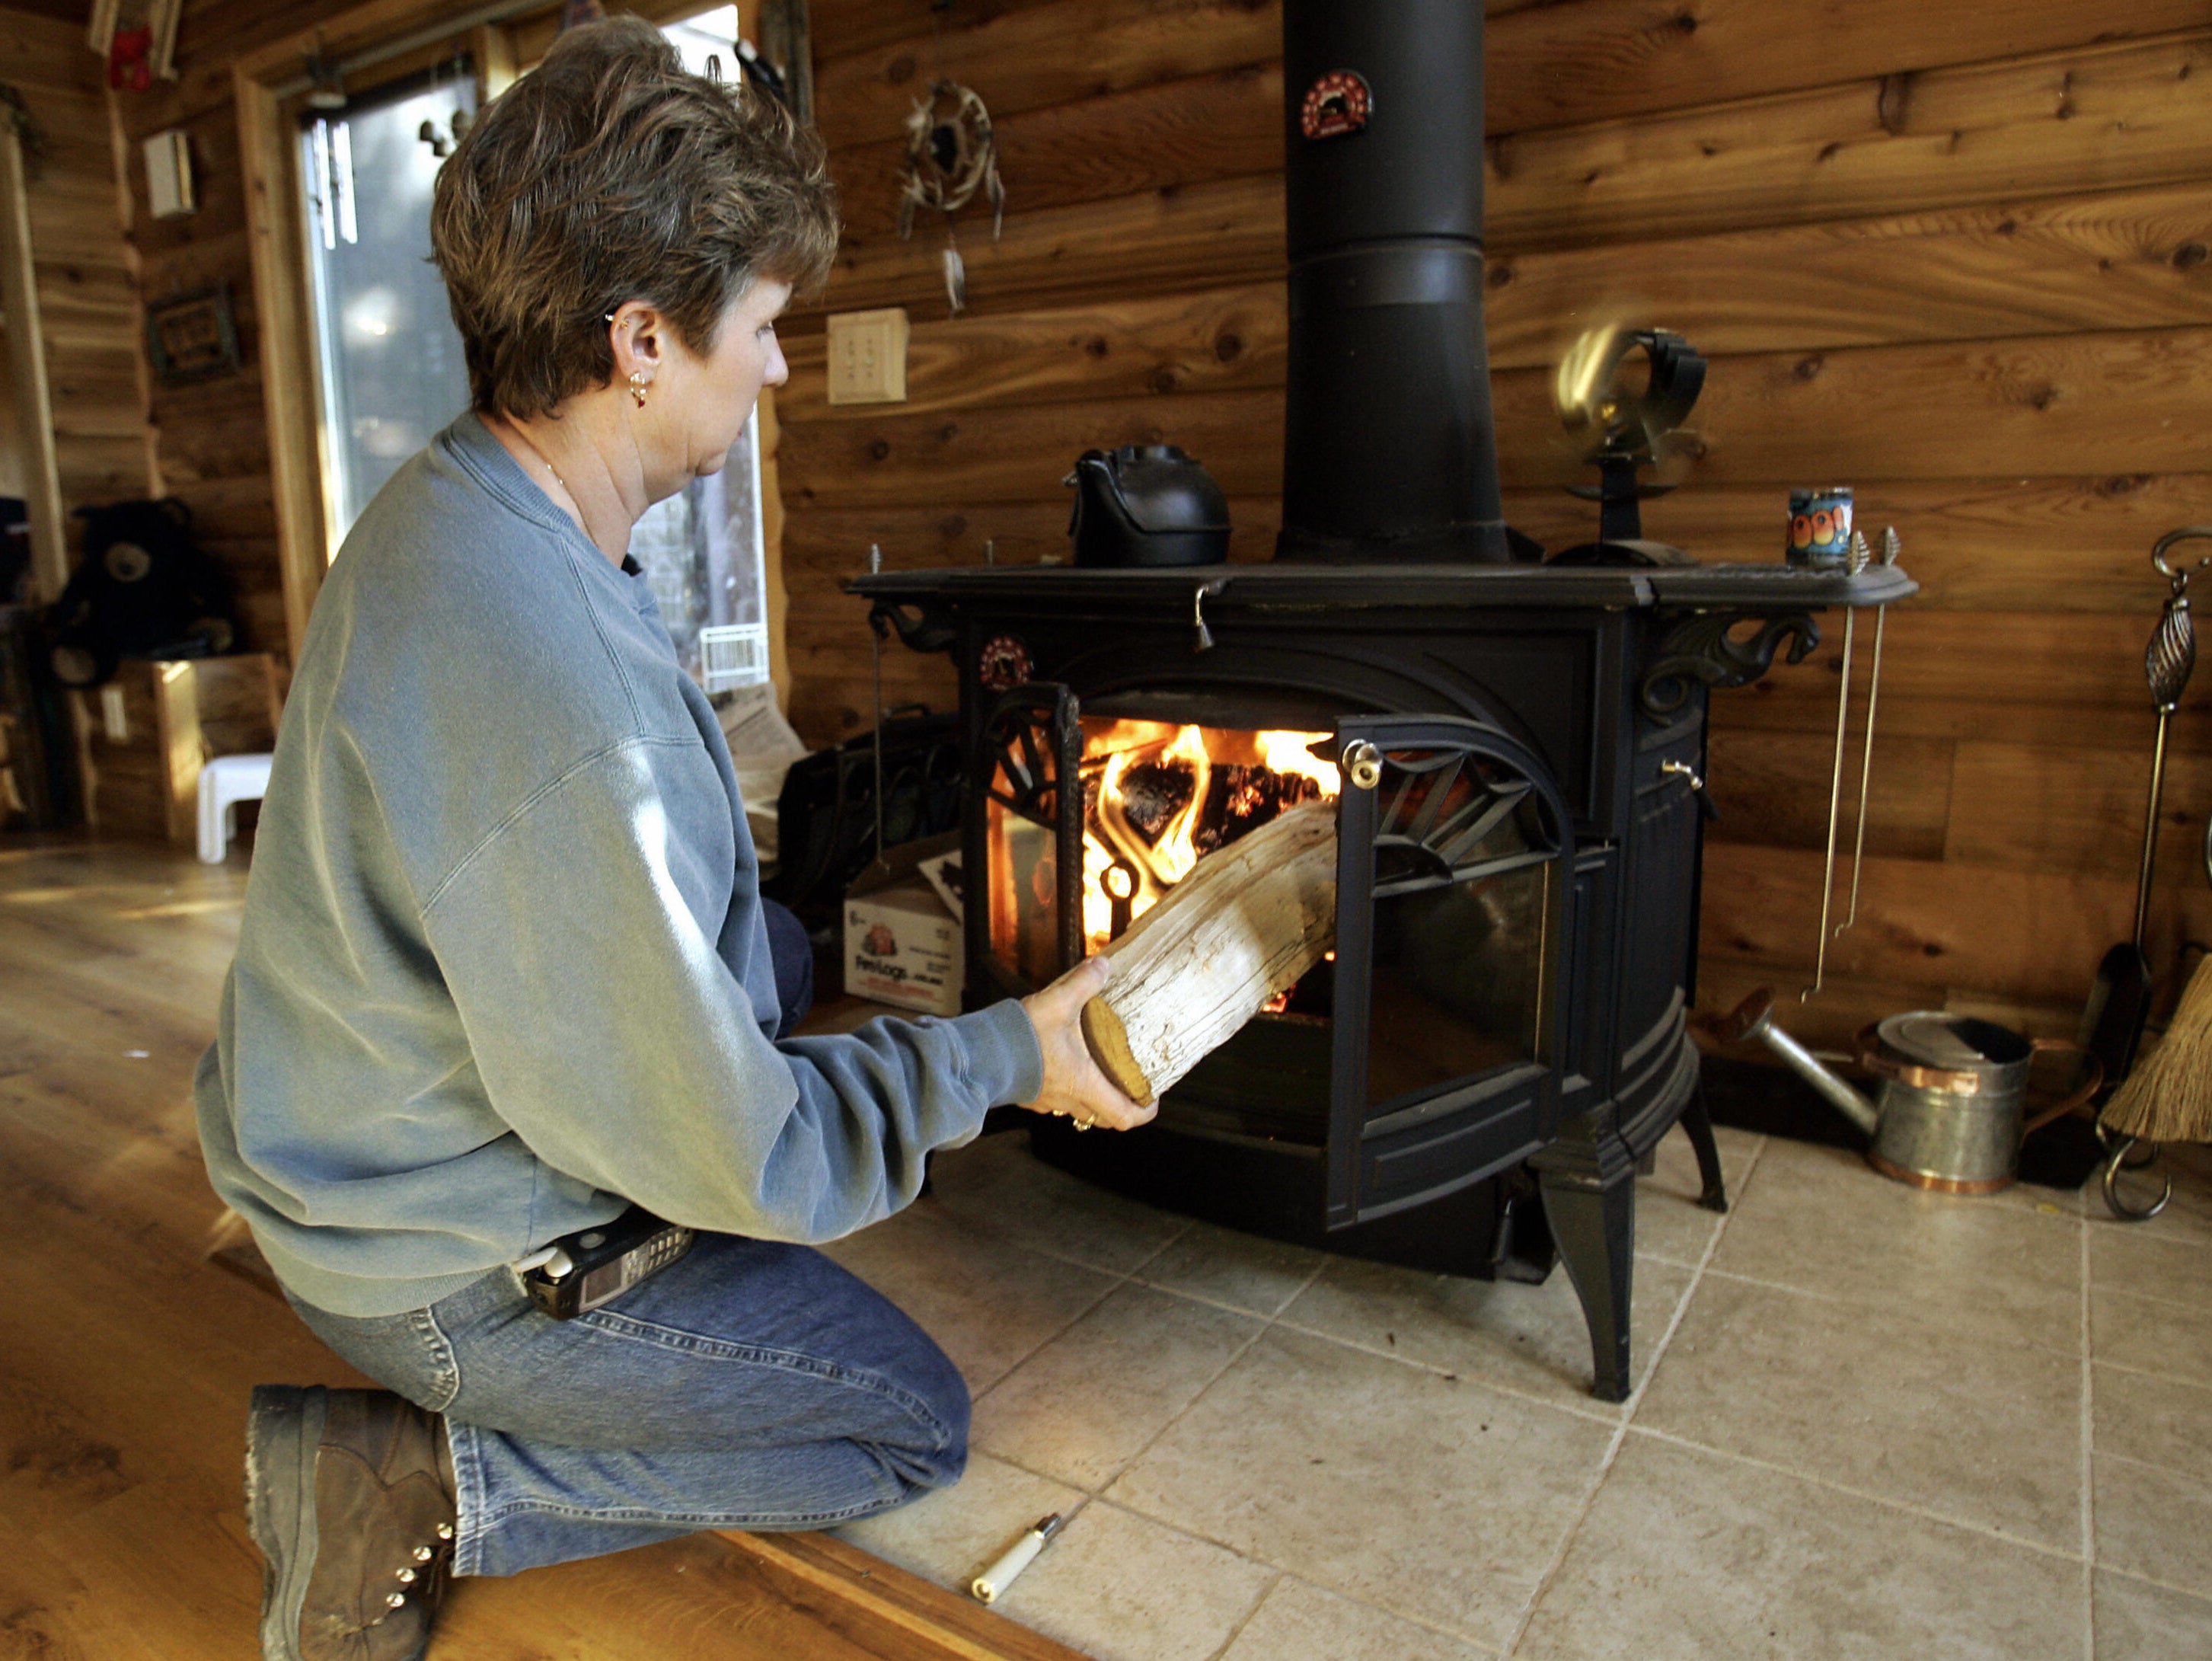 The stoves can triple harmful particulate pollution inside homes